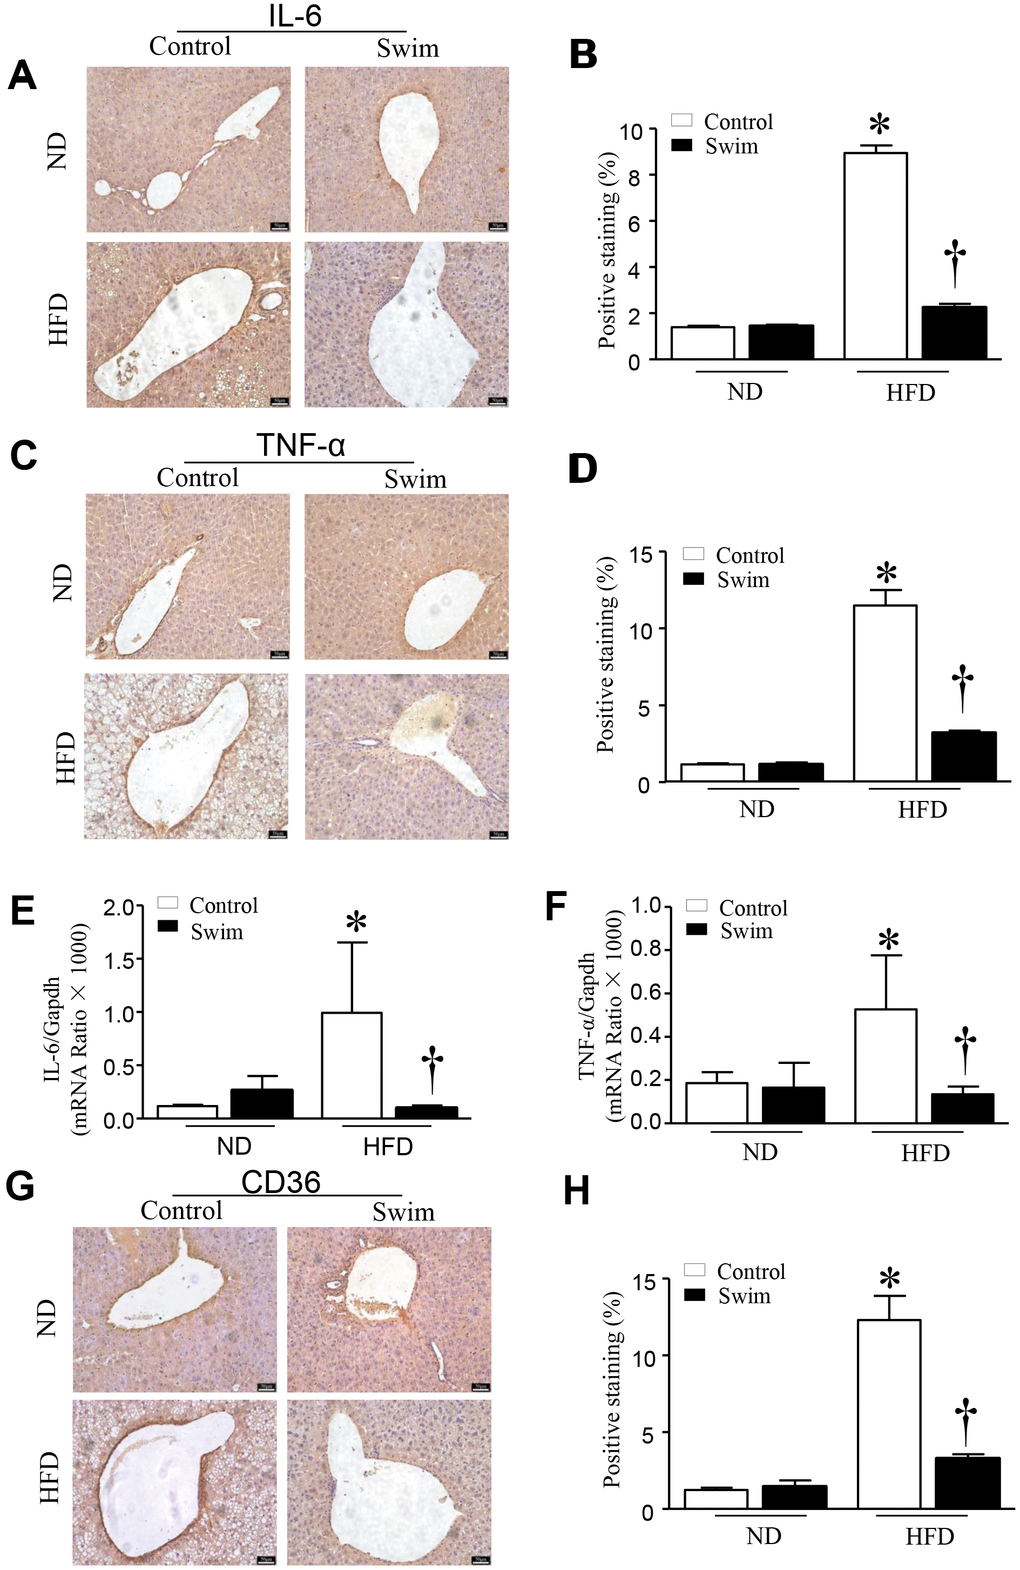 Exercise reduces inflammatory indices in HFD-fed mice. Representative and quantification with immunohistochemical staining of IL-6 (A, B), TNF-α (C, D) and CD36 (G, H) in the liver tissue. Quantification of mRNA for IL-6 (E), and TNF-α (F). Data are presented as mean ± SD, n = 6. * P 